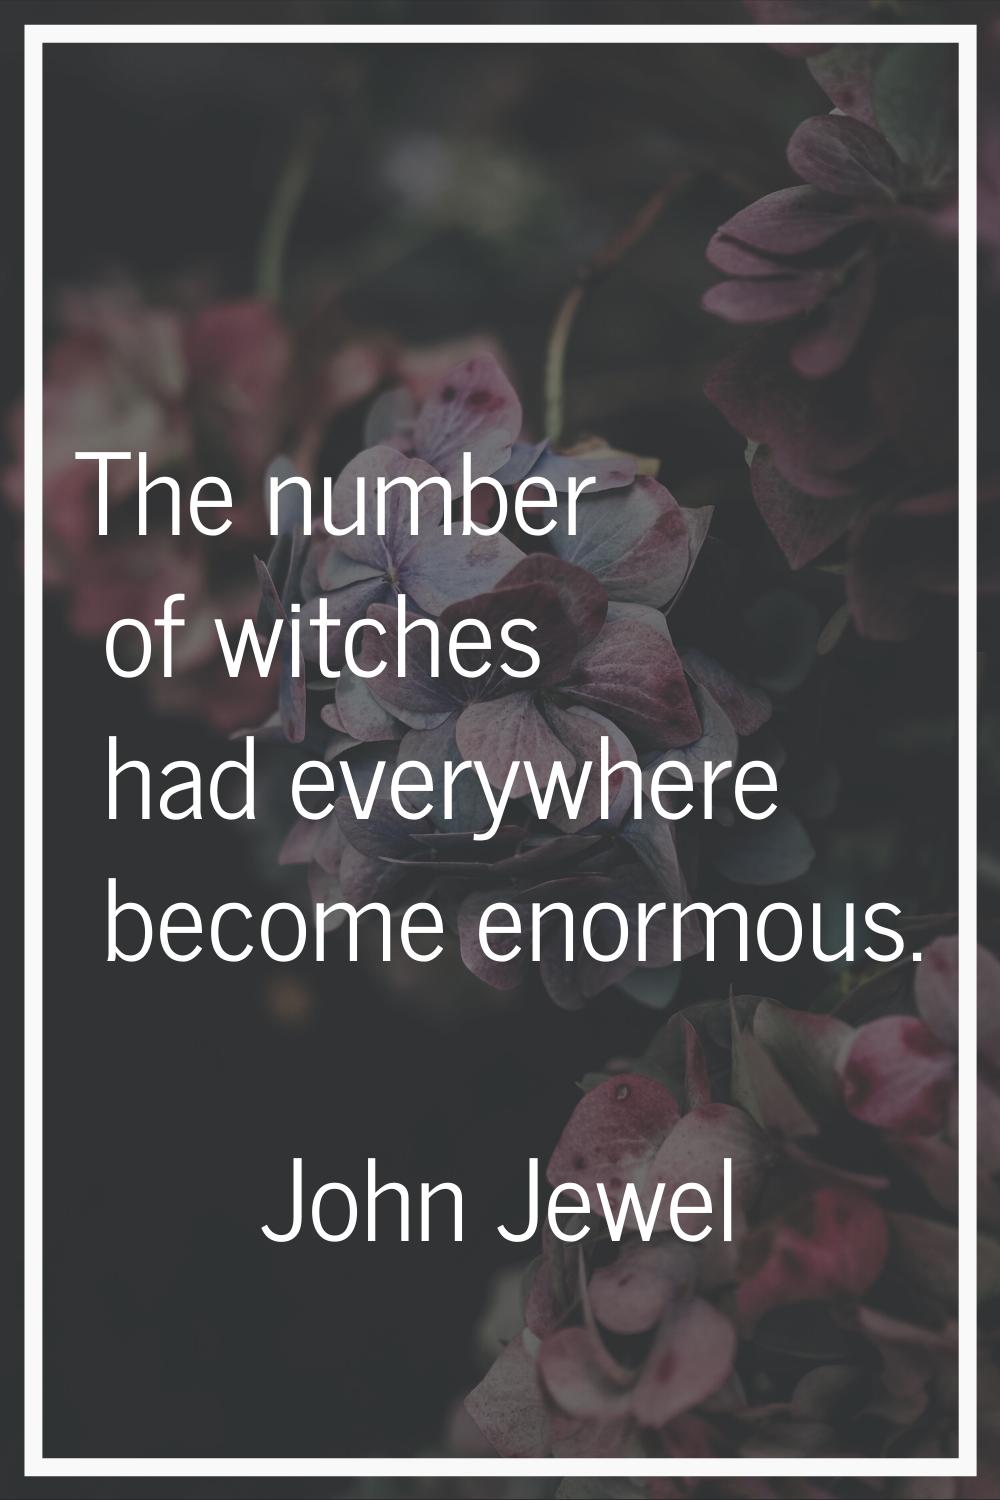 The number of witches had everywhere become enormous.